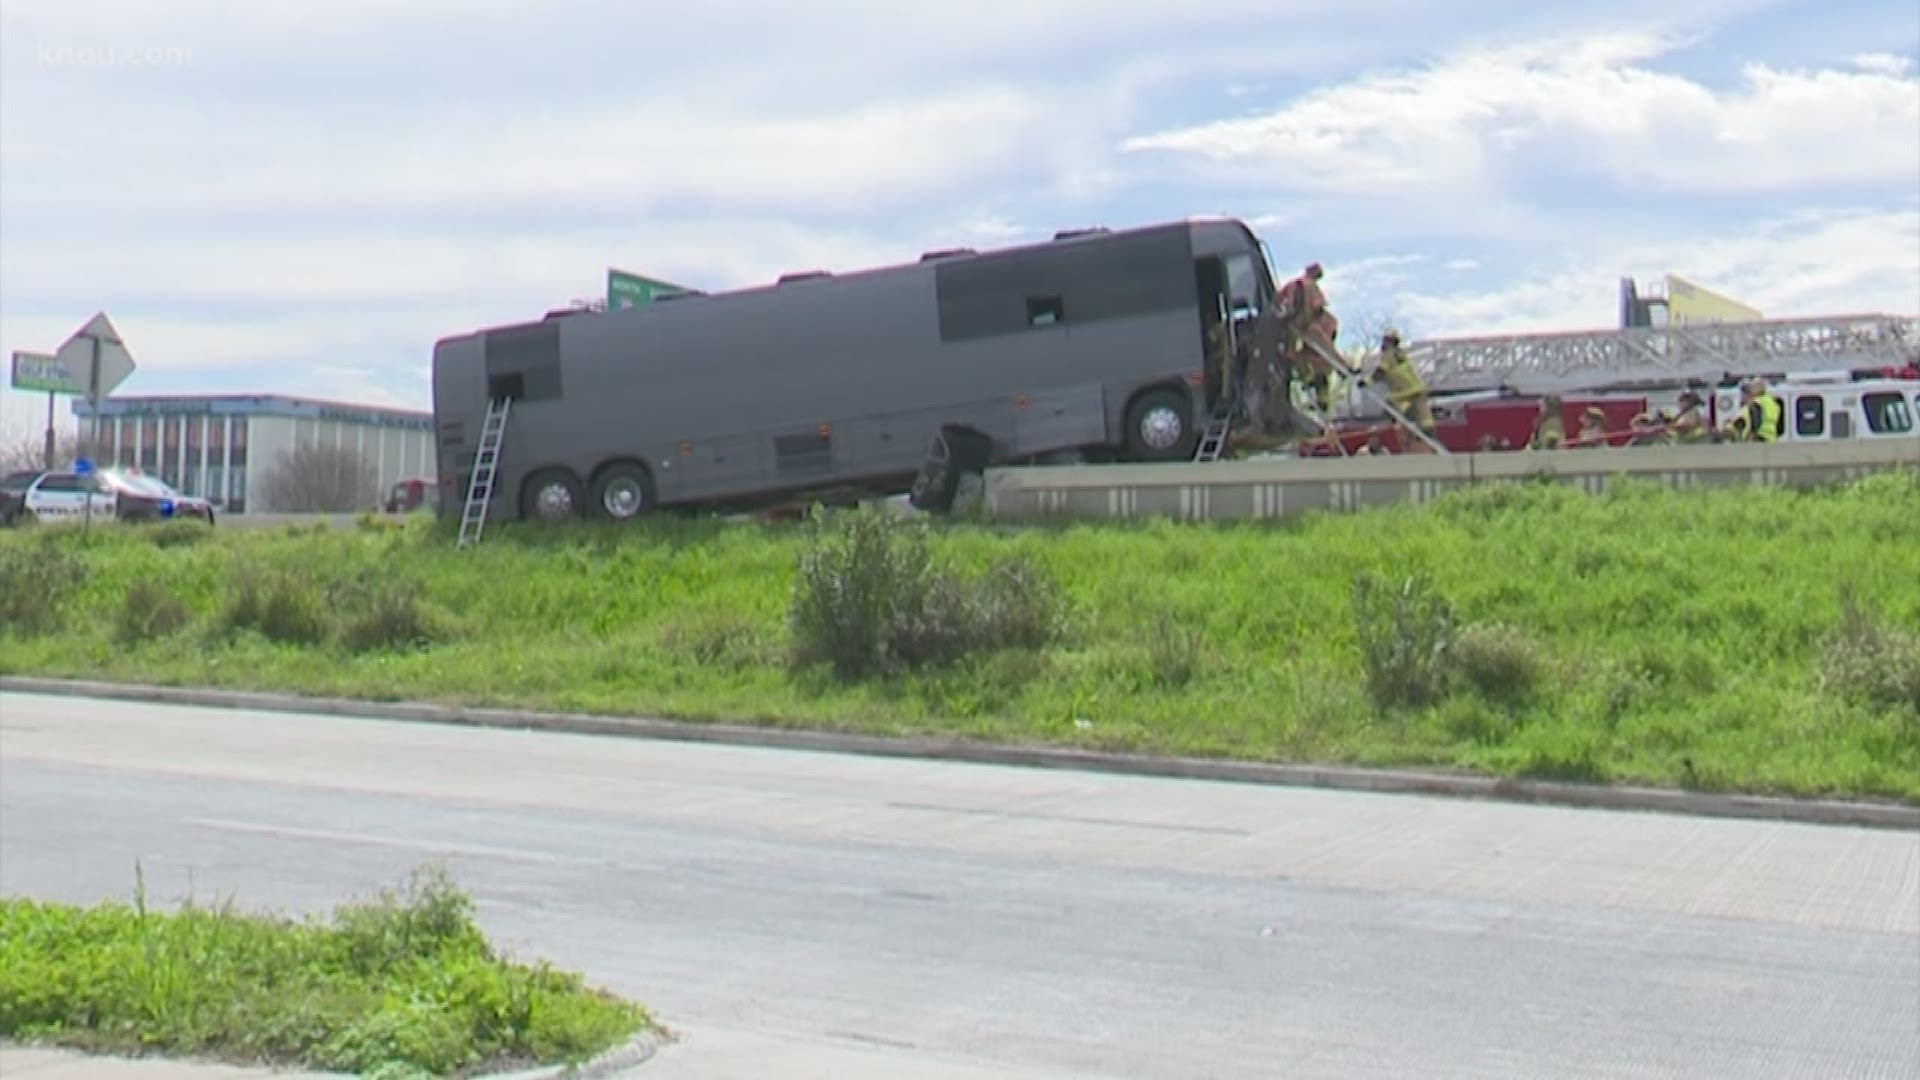 Eleven people on board a charter bus were injured Saturday morning after the bus crashed into a barrier on the North Loop near I-45.